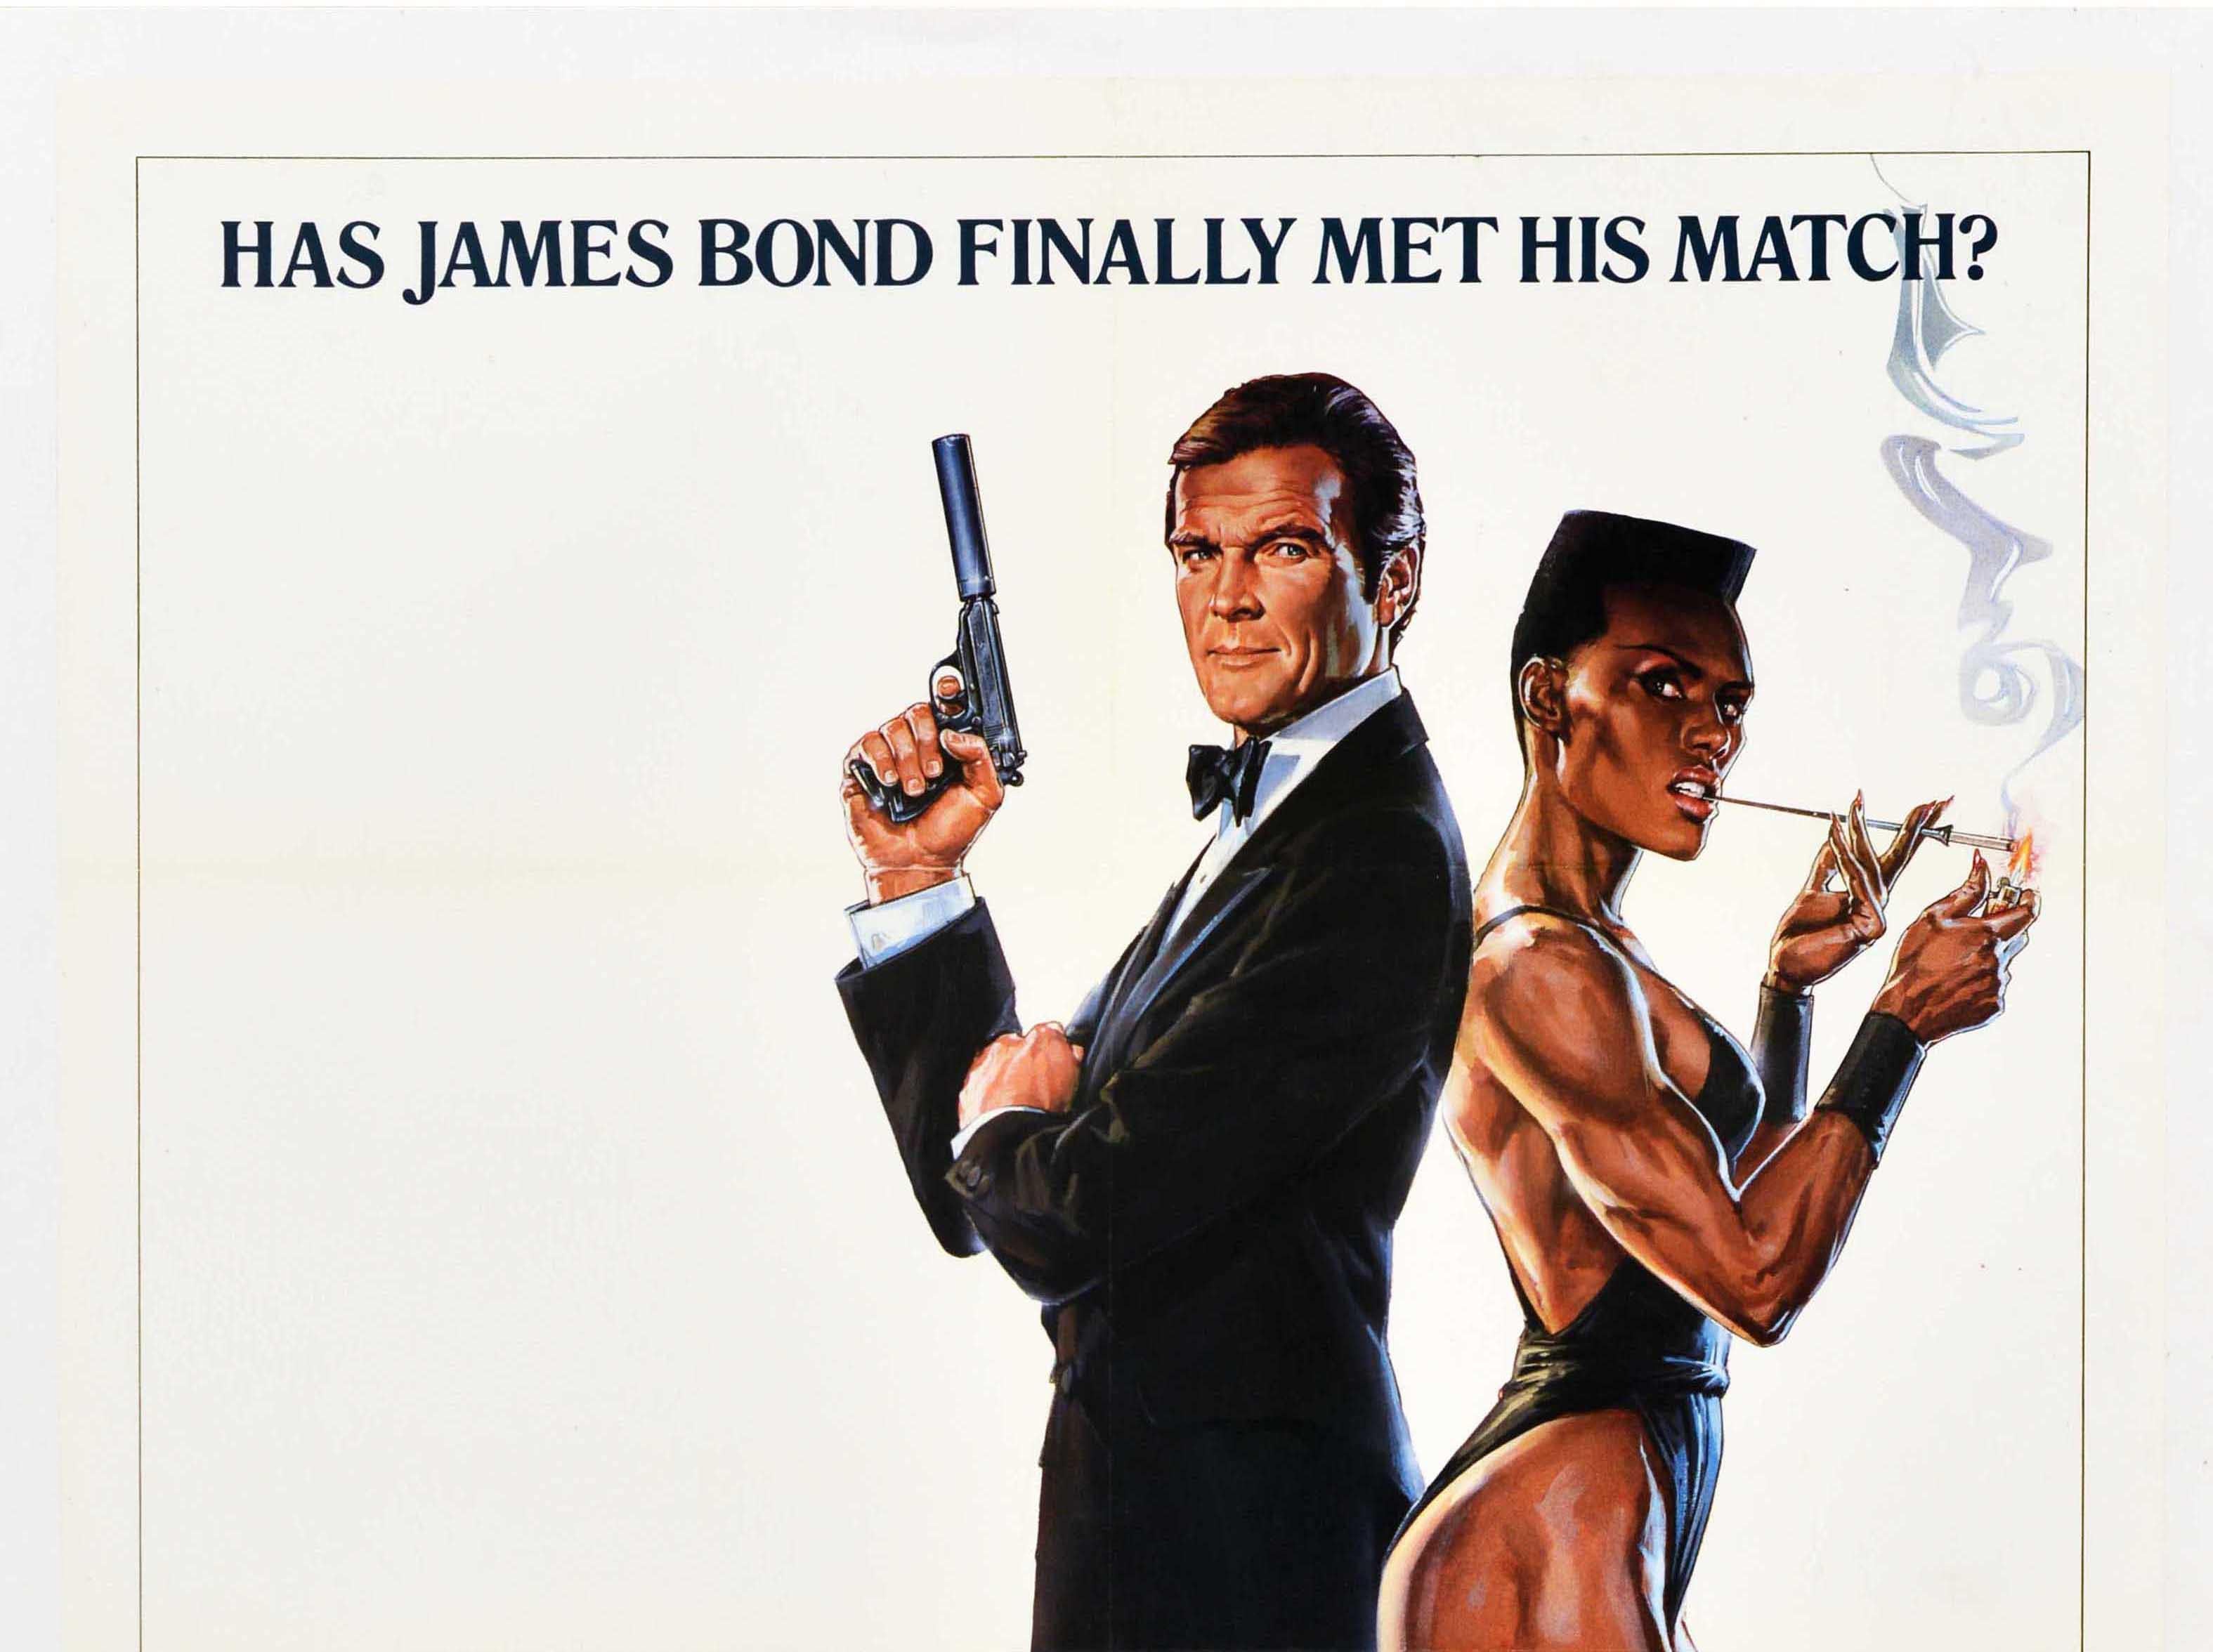 Original vintage movie poster issued in advance of the release in America of the classic spy film James Bond 007 A View to Kill - Has James Bond finally met his match? Find out this summer - directed by John Glen and starring Roger Moore (in his